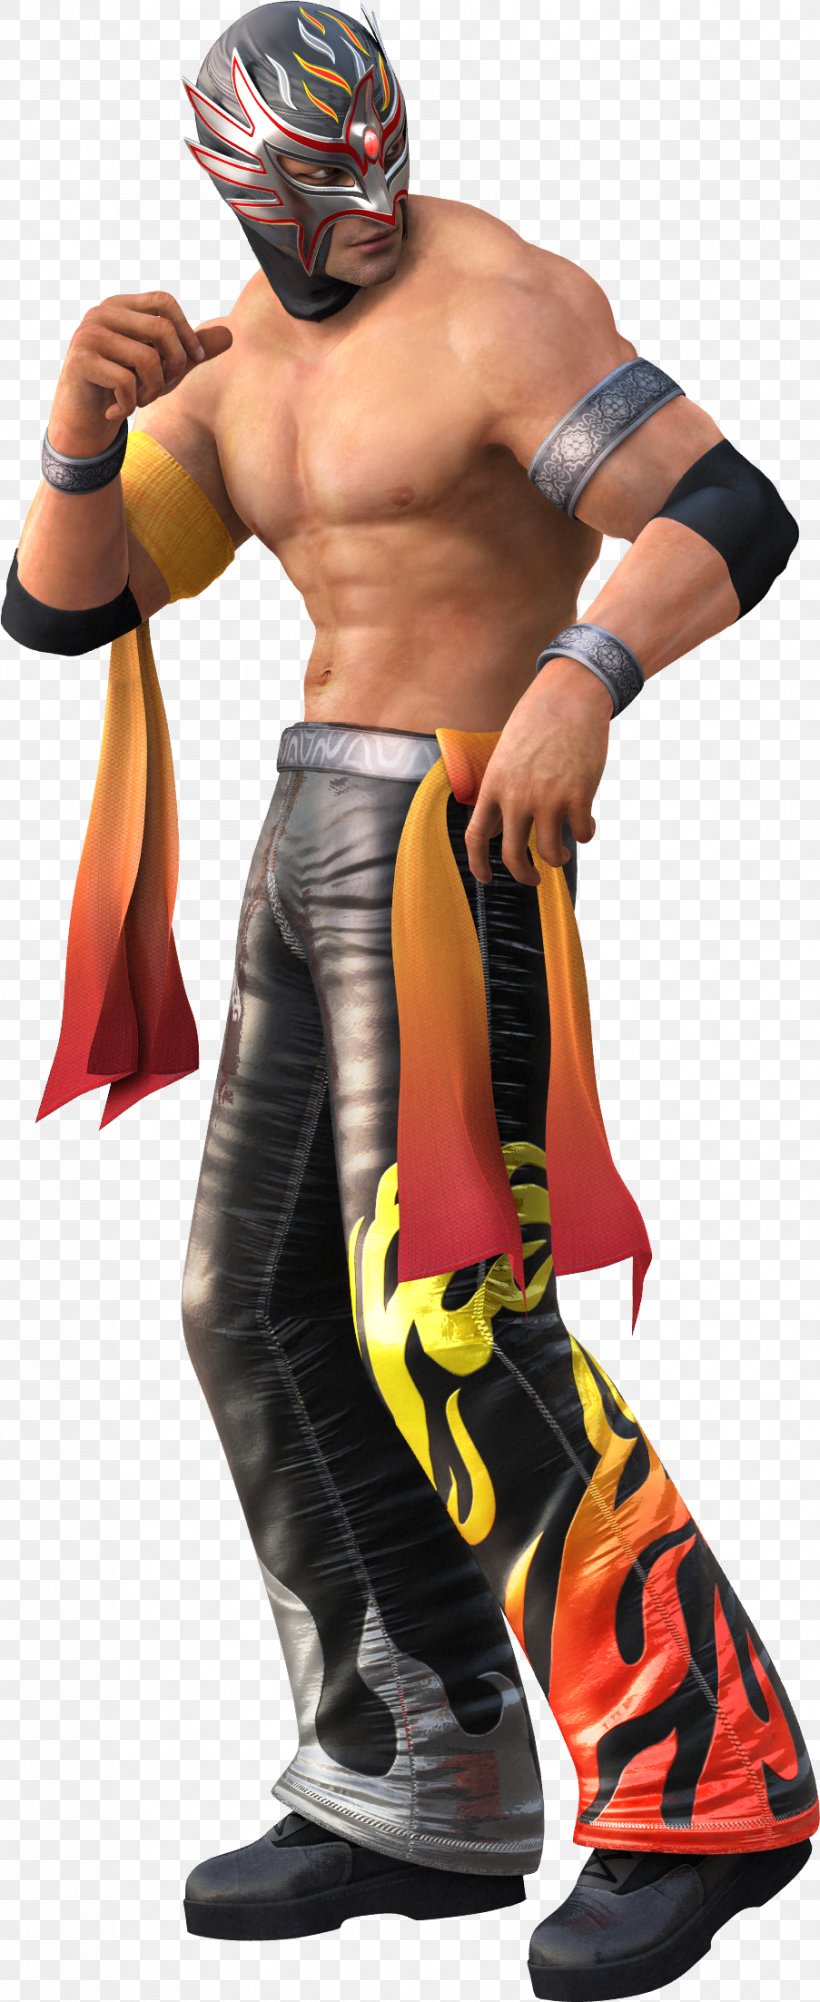 Virtua Fighter 5 Virtua Fighter 4 Video Game Fighting Game, PNG, 903x2205px, Virtua Fighter, Action Figure, Aggression, Arcade Game, Barechestedness Download Free